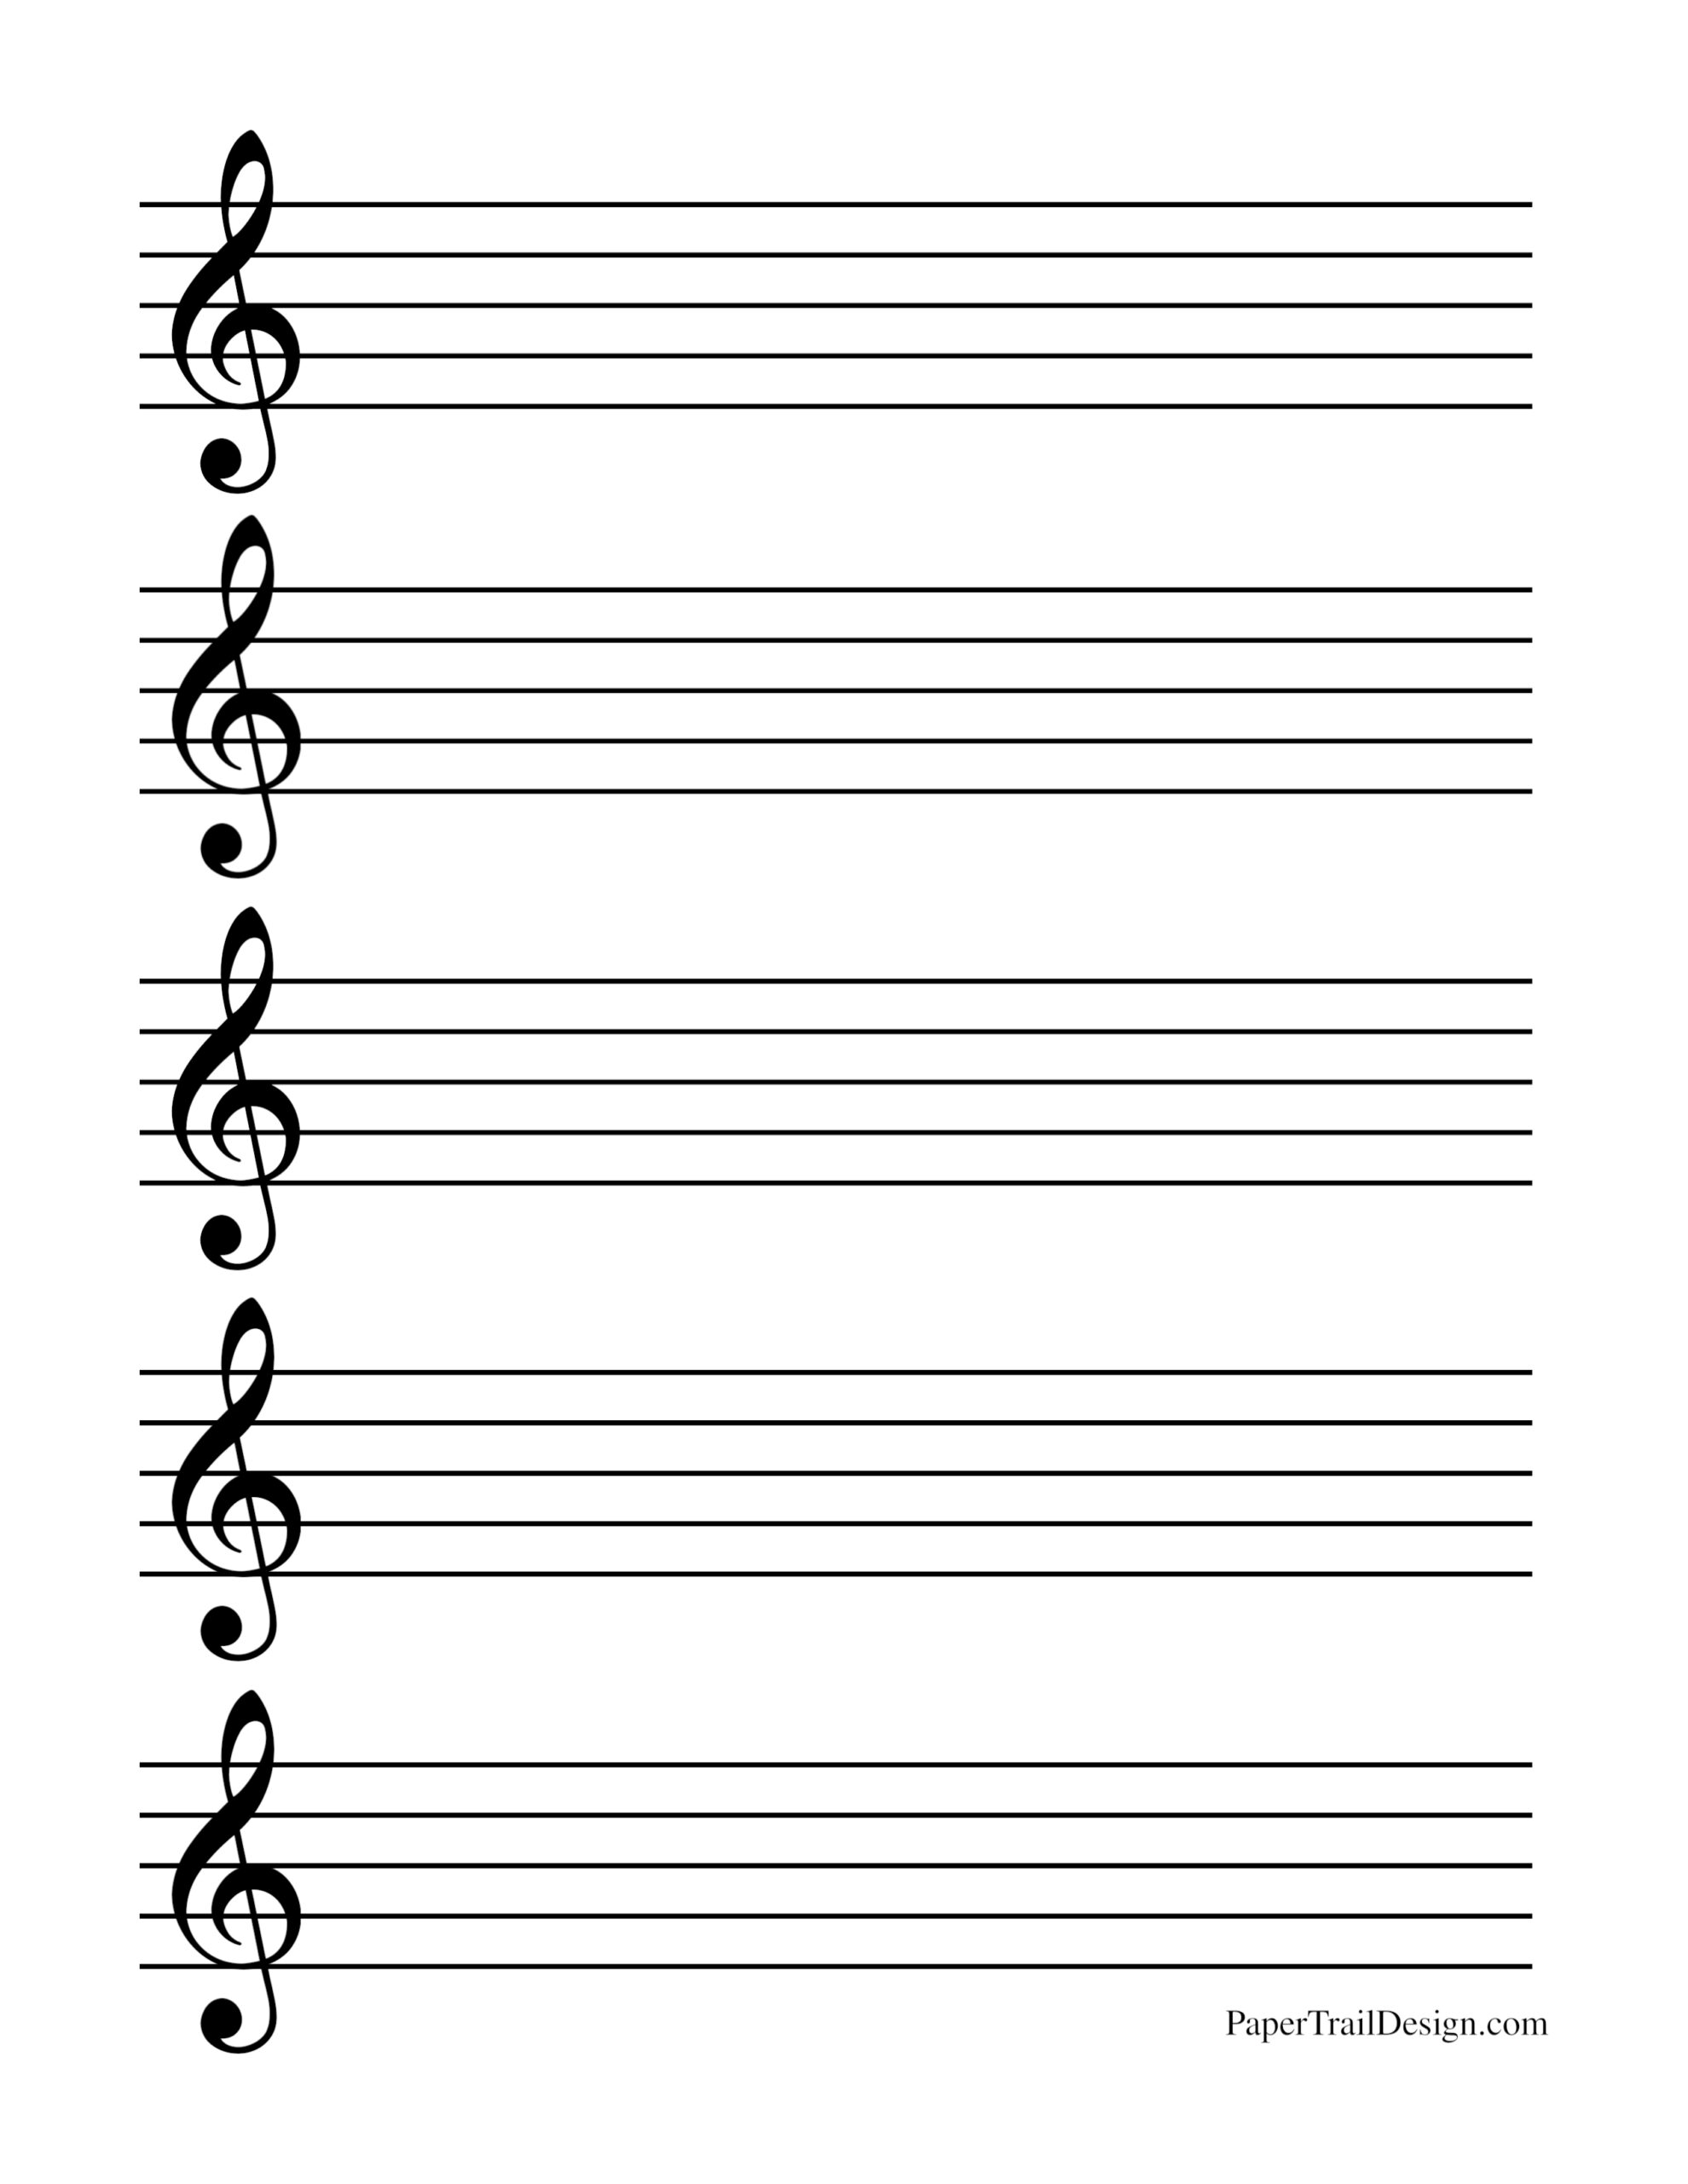 free-printable-music-sheet-paper-get-what-you-need-for-free